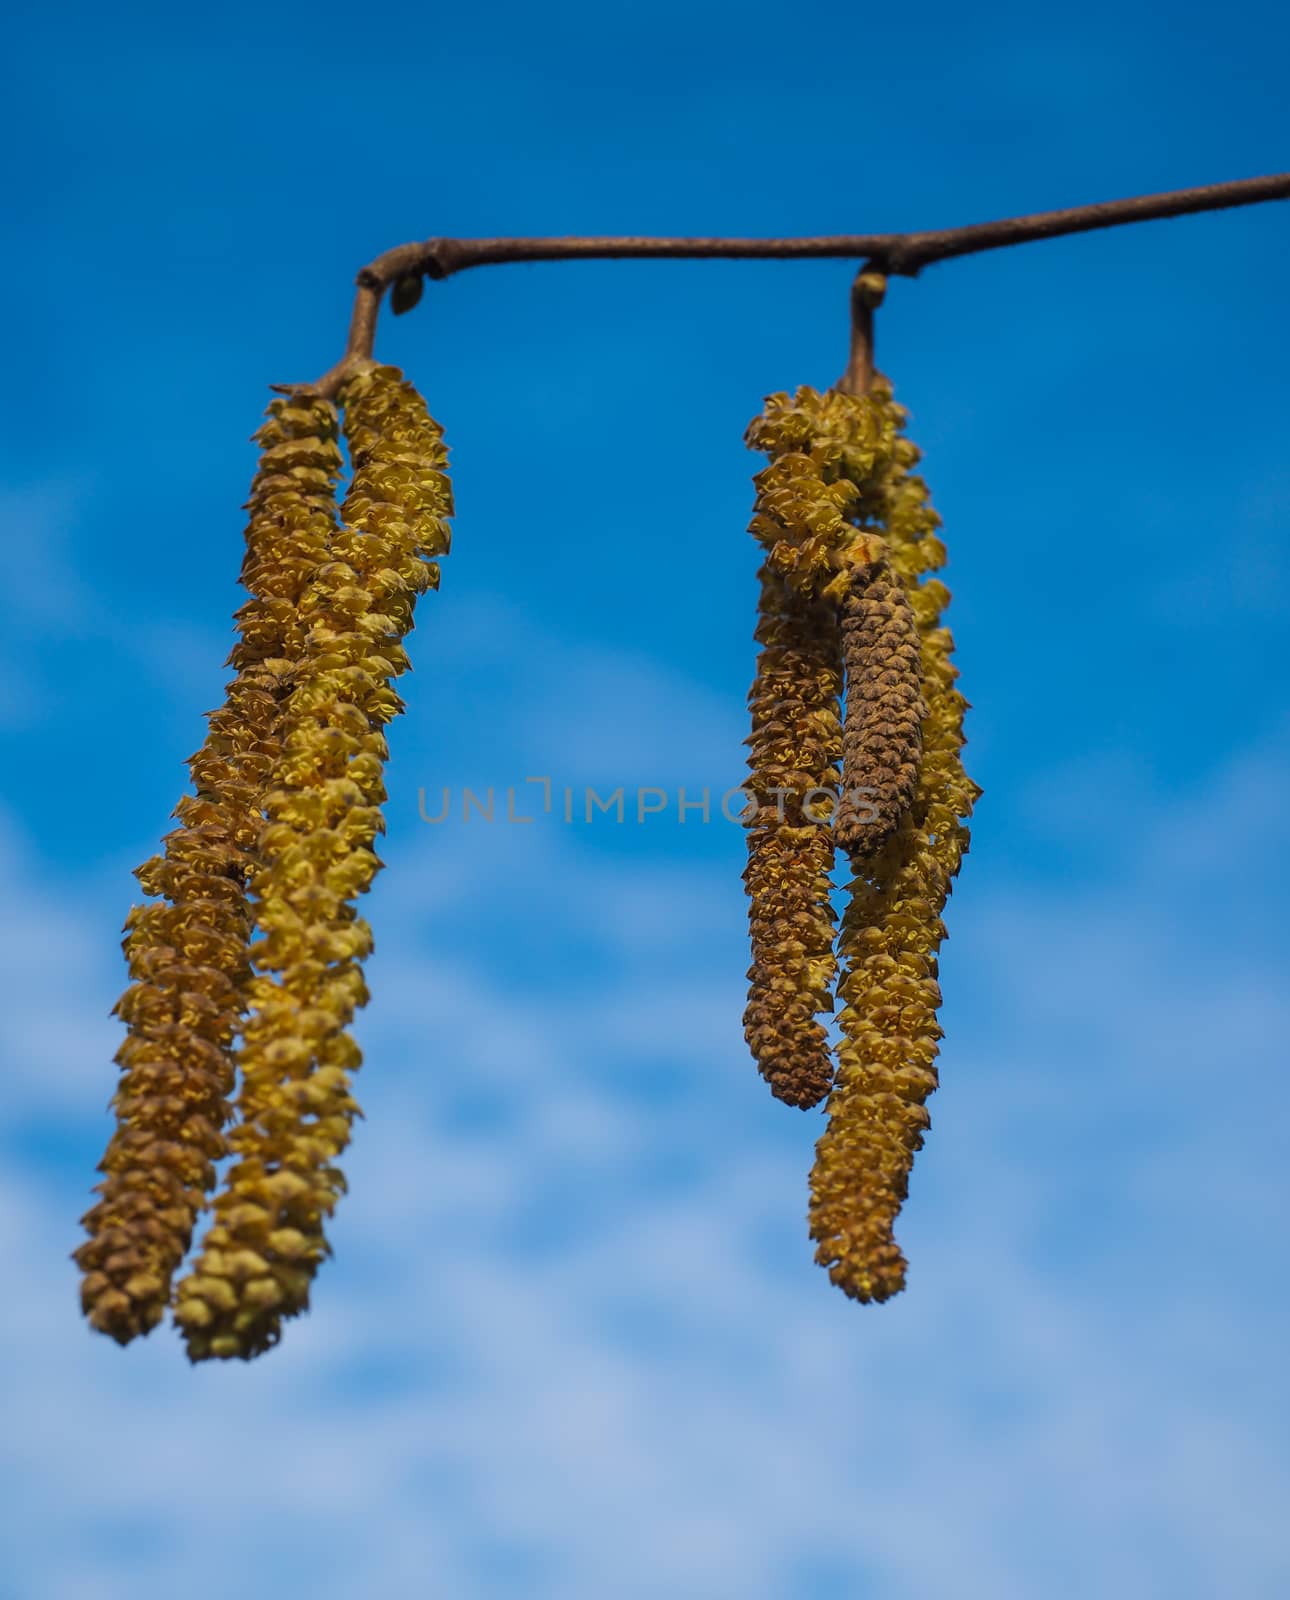 Seed buds from a birch tree hanging in front of blue sky at spri by Arvebettum